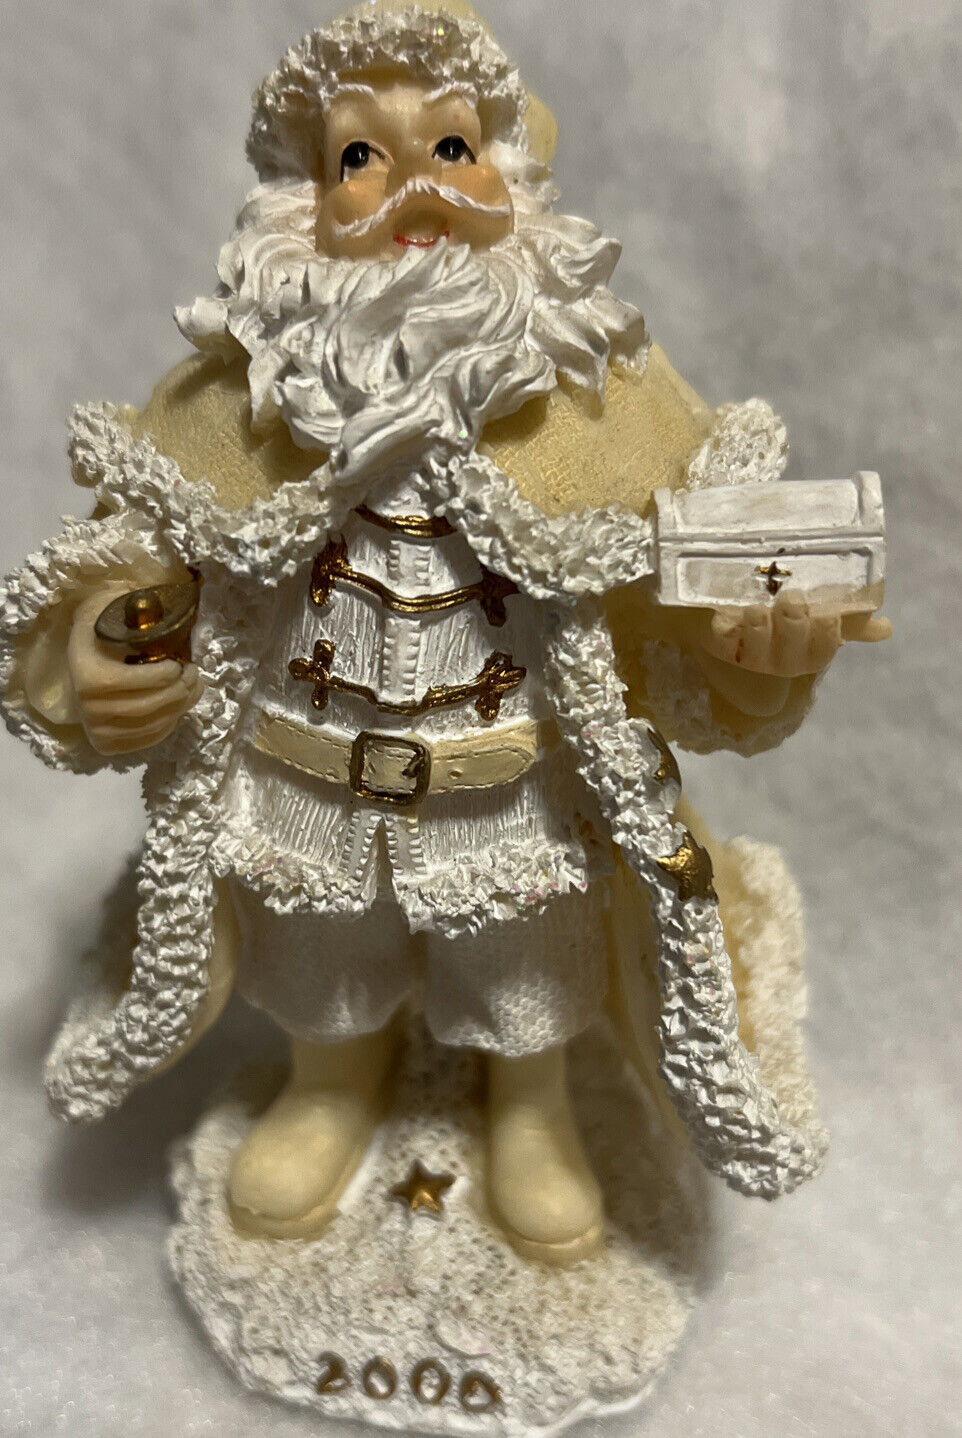 Is Collection 2000 Santa Claus Cream Colored With Gold